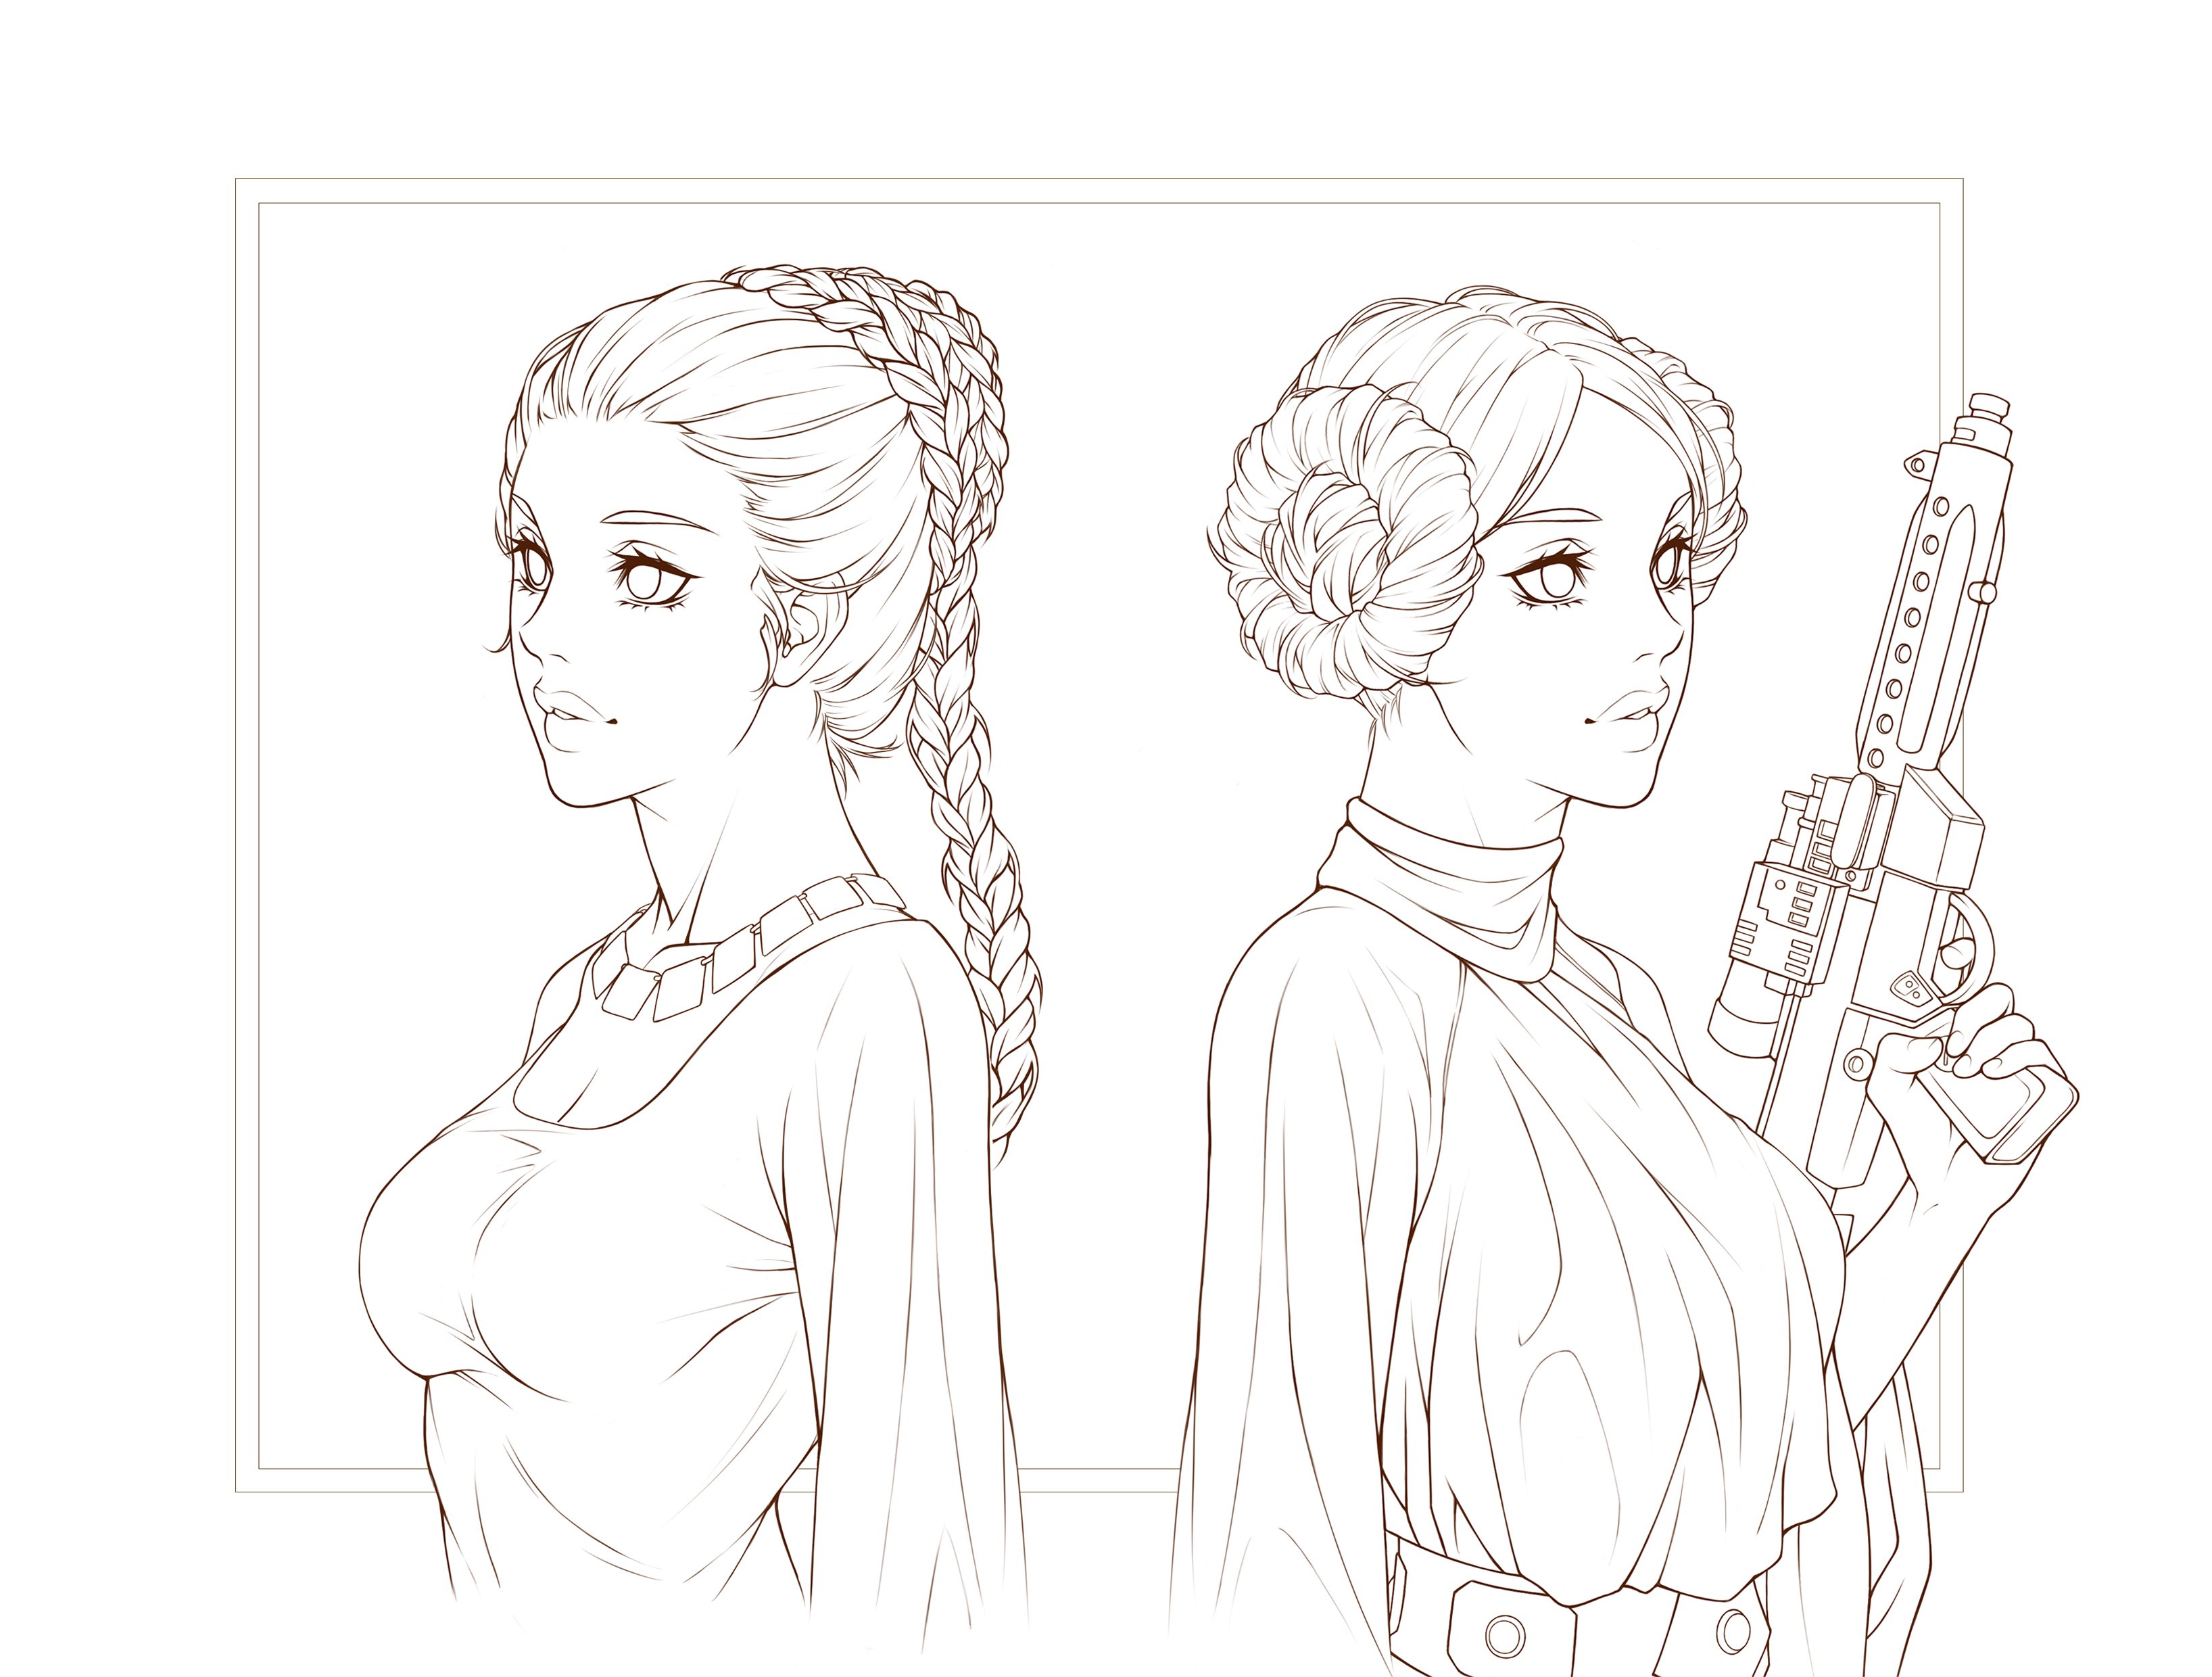 Khaesel on x lineart for my princess leia drawing is finally done im looking forward to coloring it fanart starwars carriefisher princessleia httpstcomzcopi x